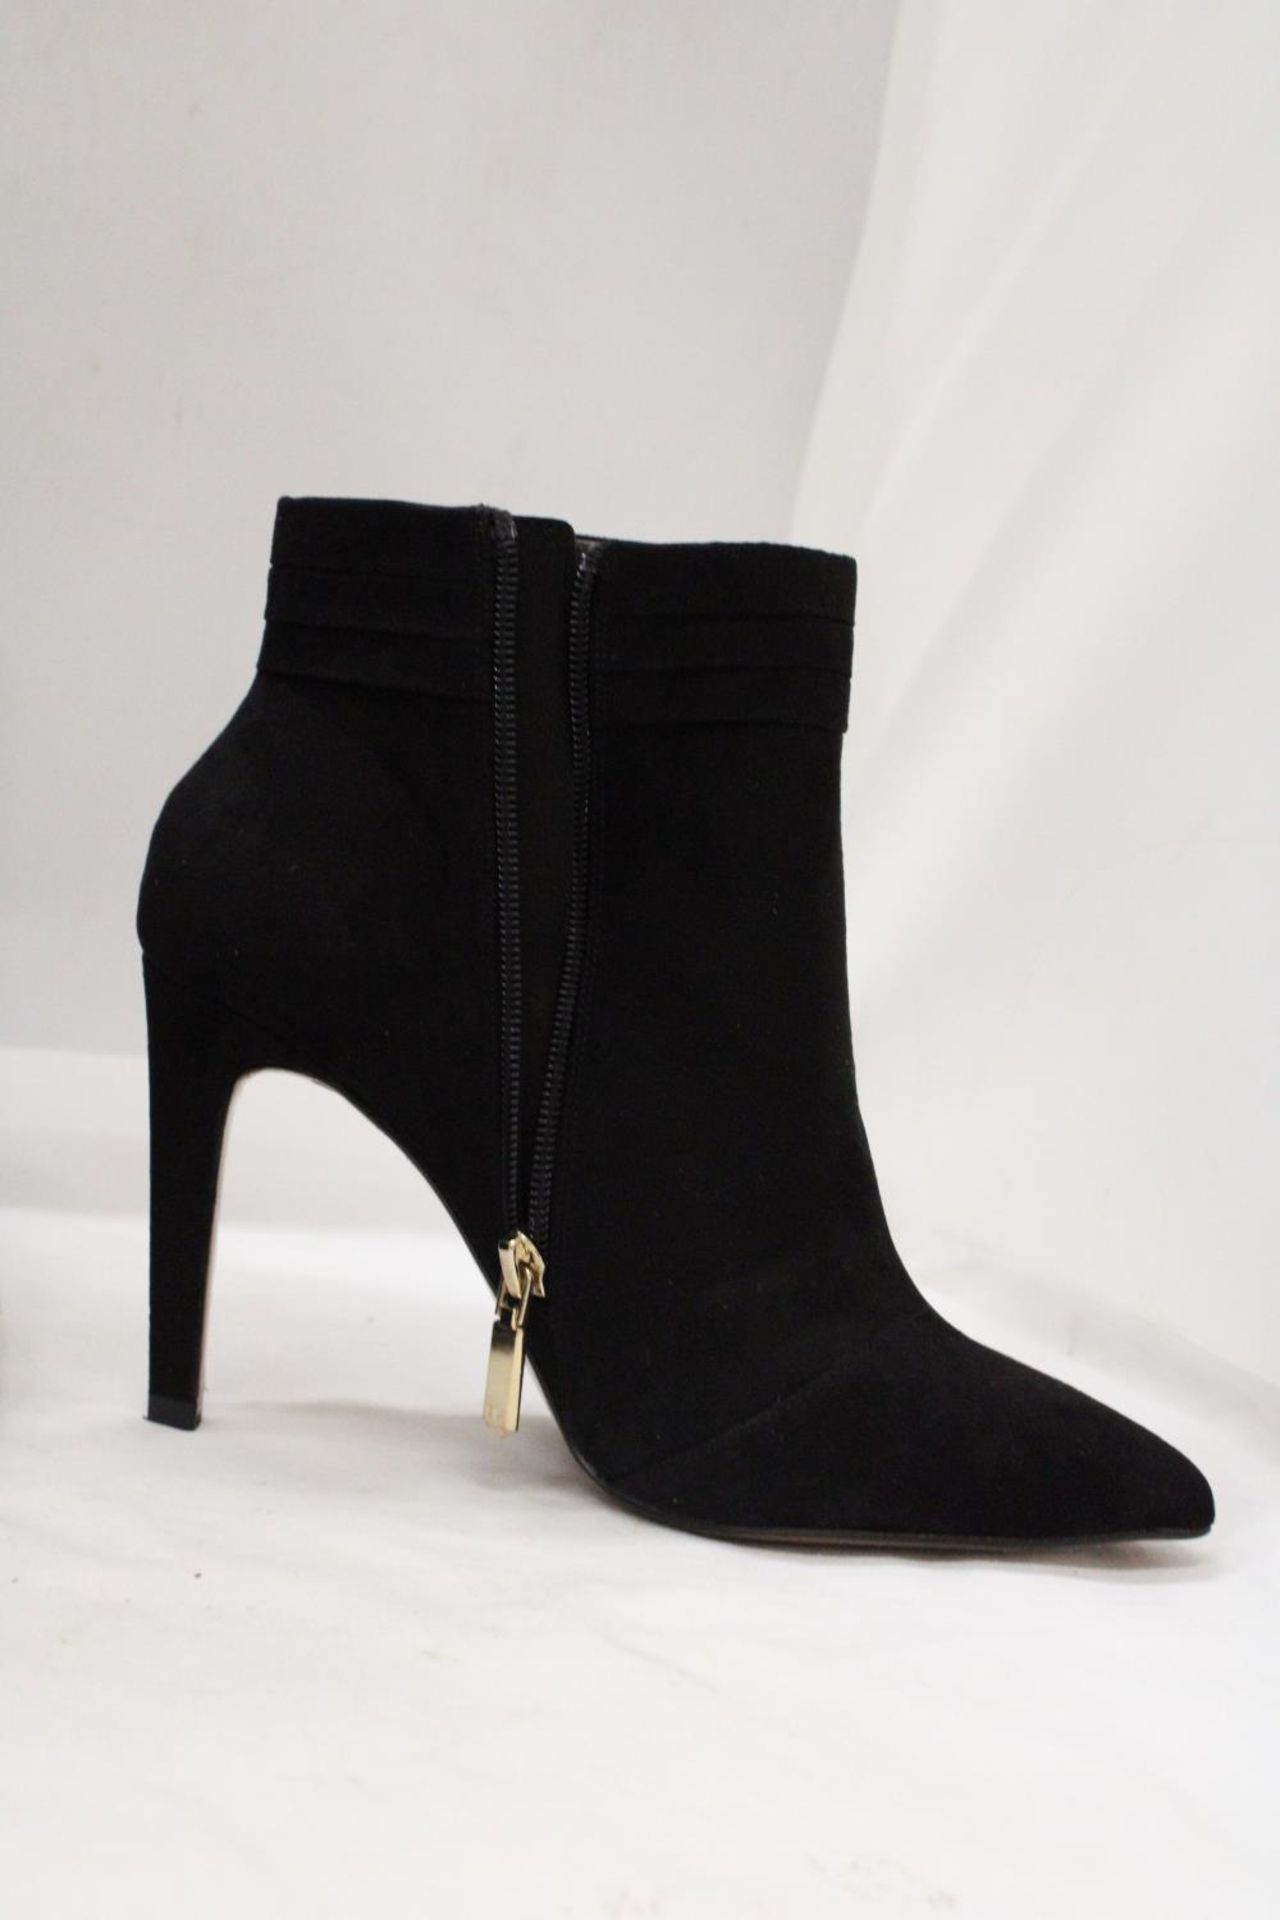 TWO PAIRS OF BOXED "KAREN MILLEN" BLACK HEELED BOOTS - BOTH SIZE 38 - Image 3 of 6